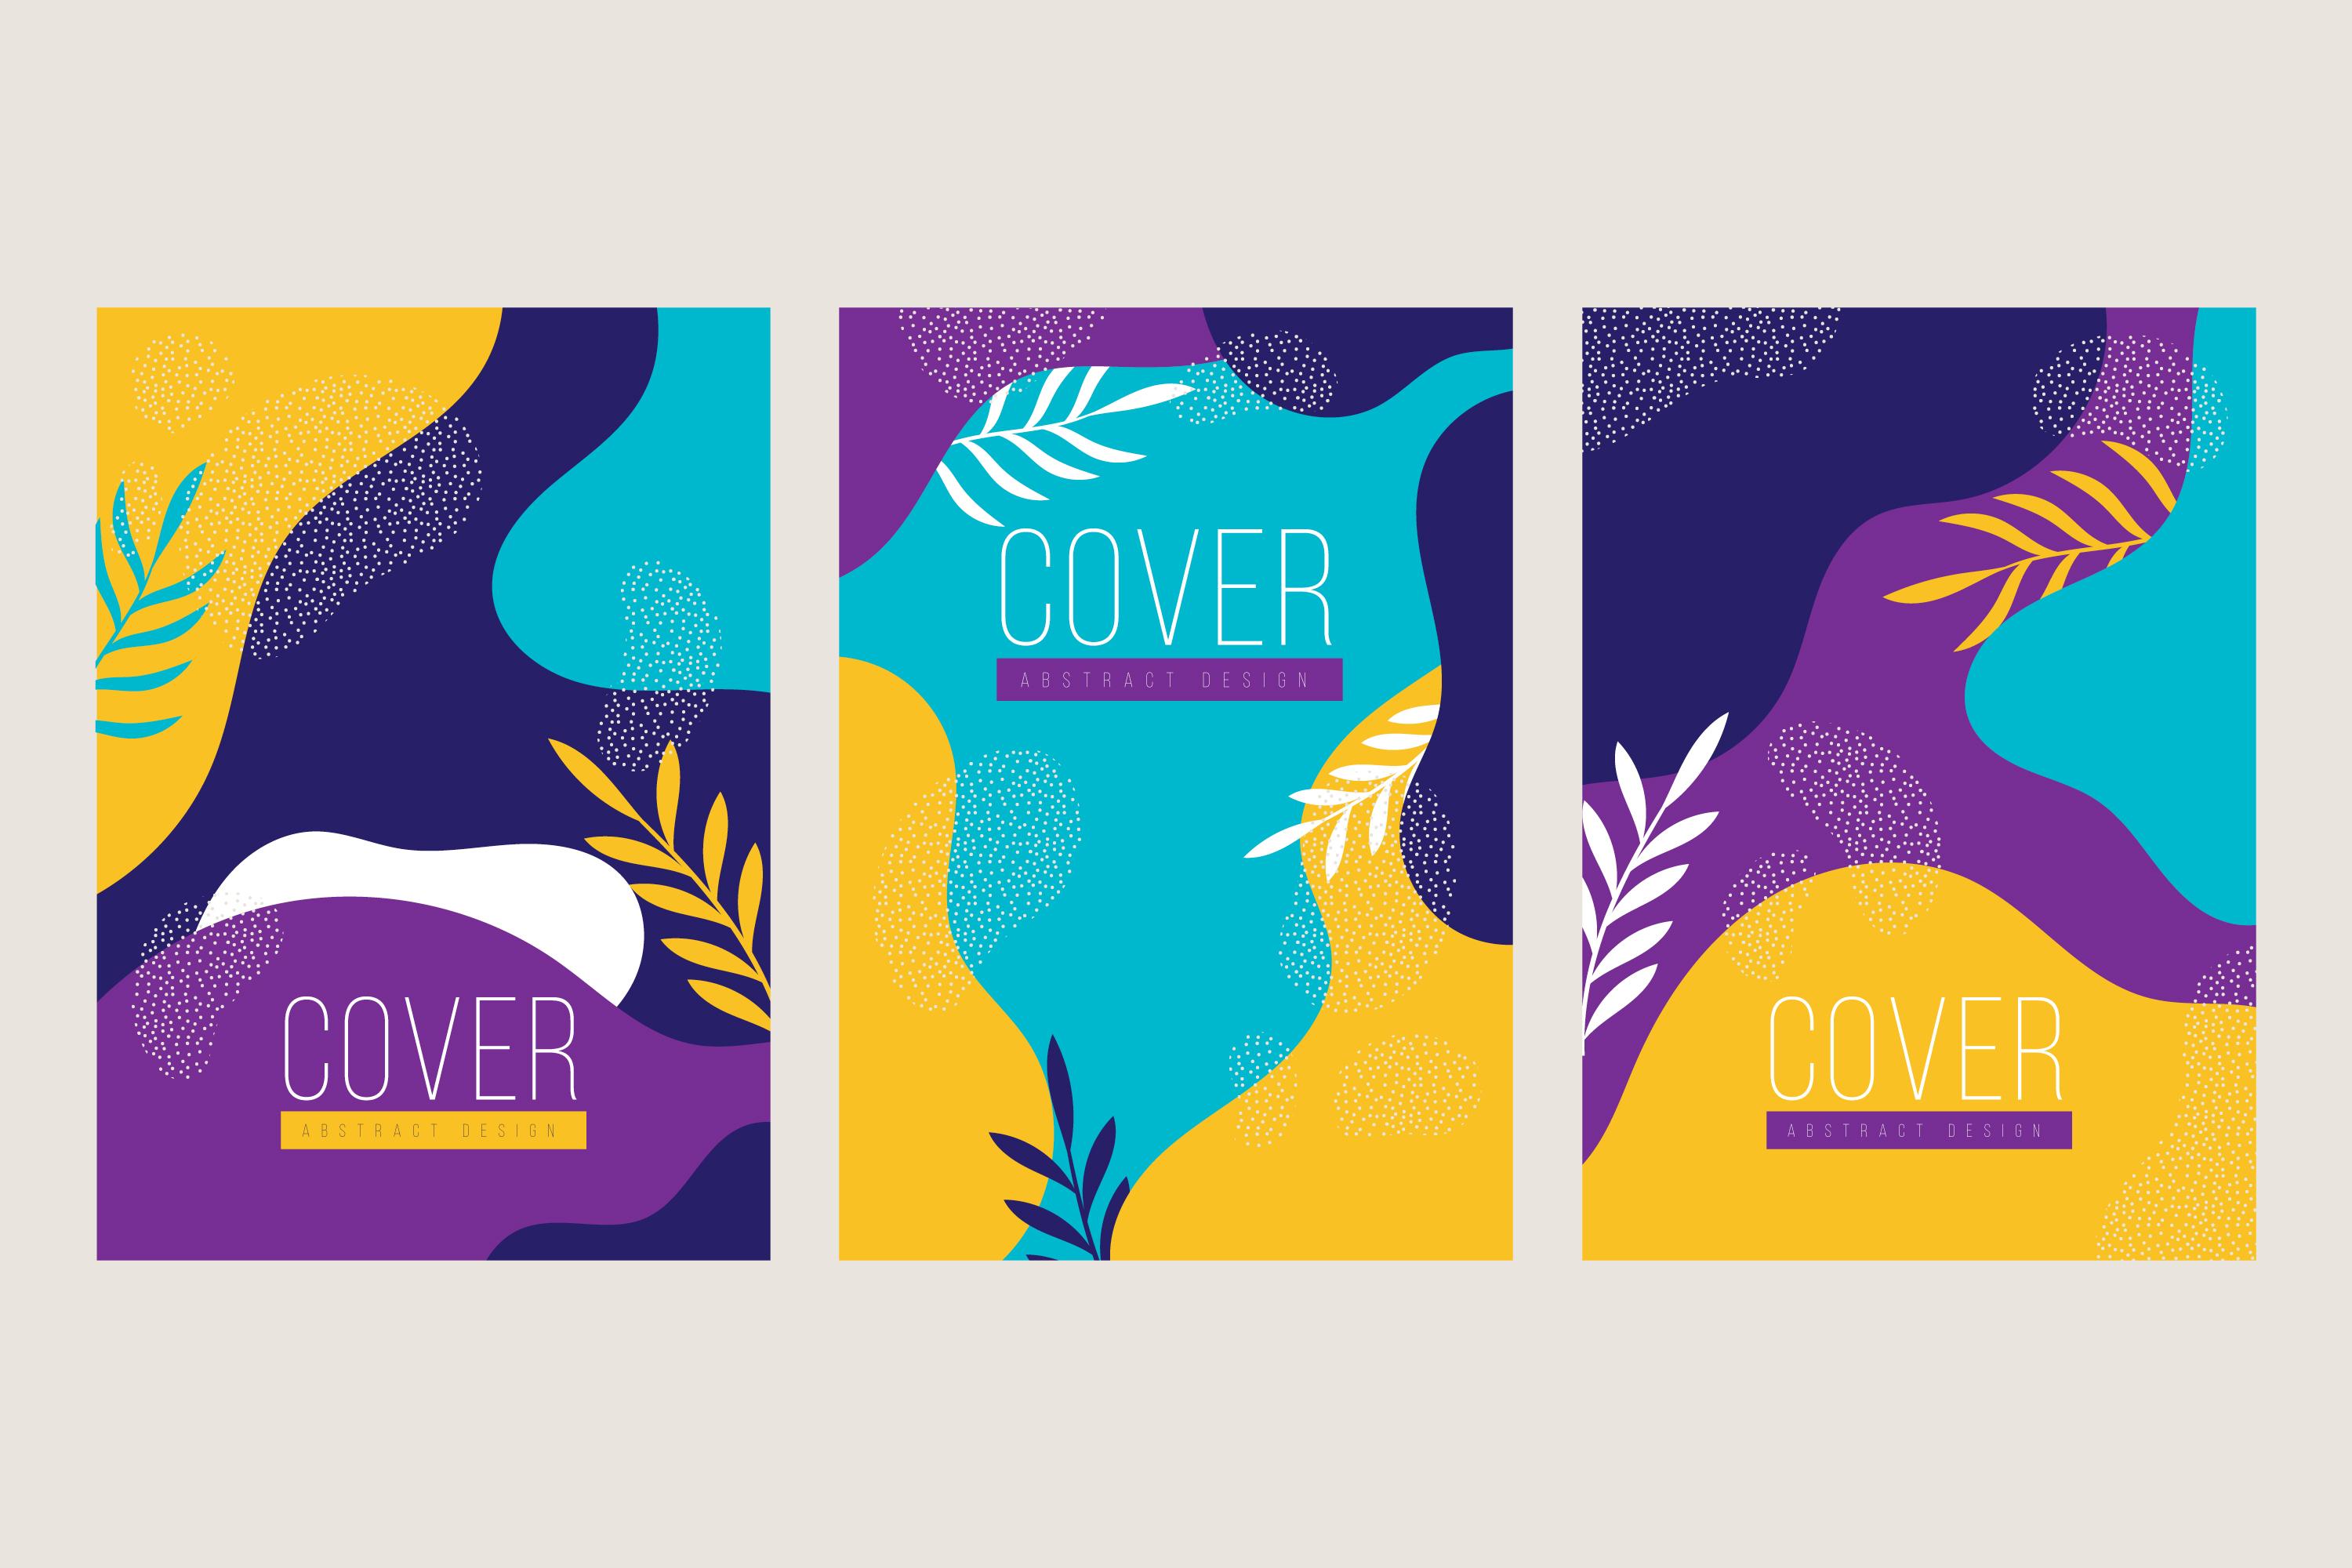 Colorful Worlds: Illustrations and Covers Inspired by Your Text